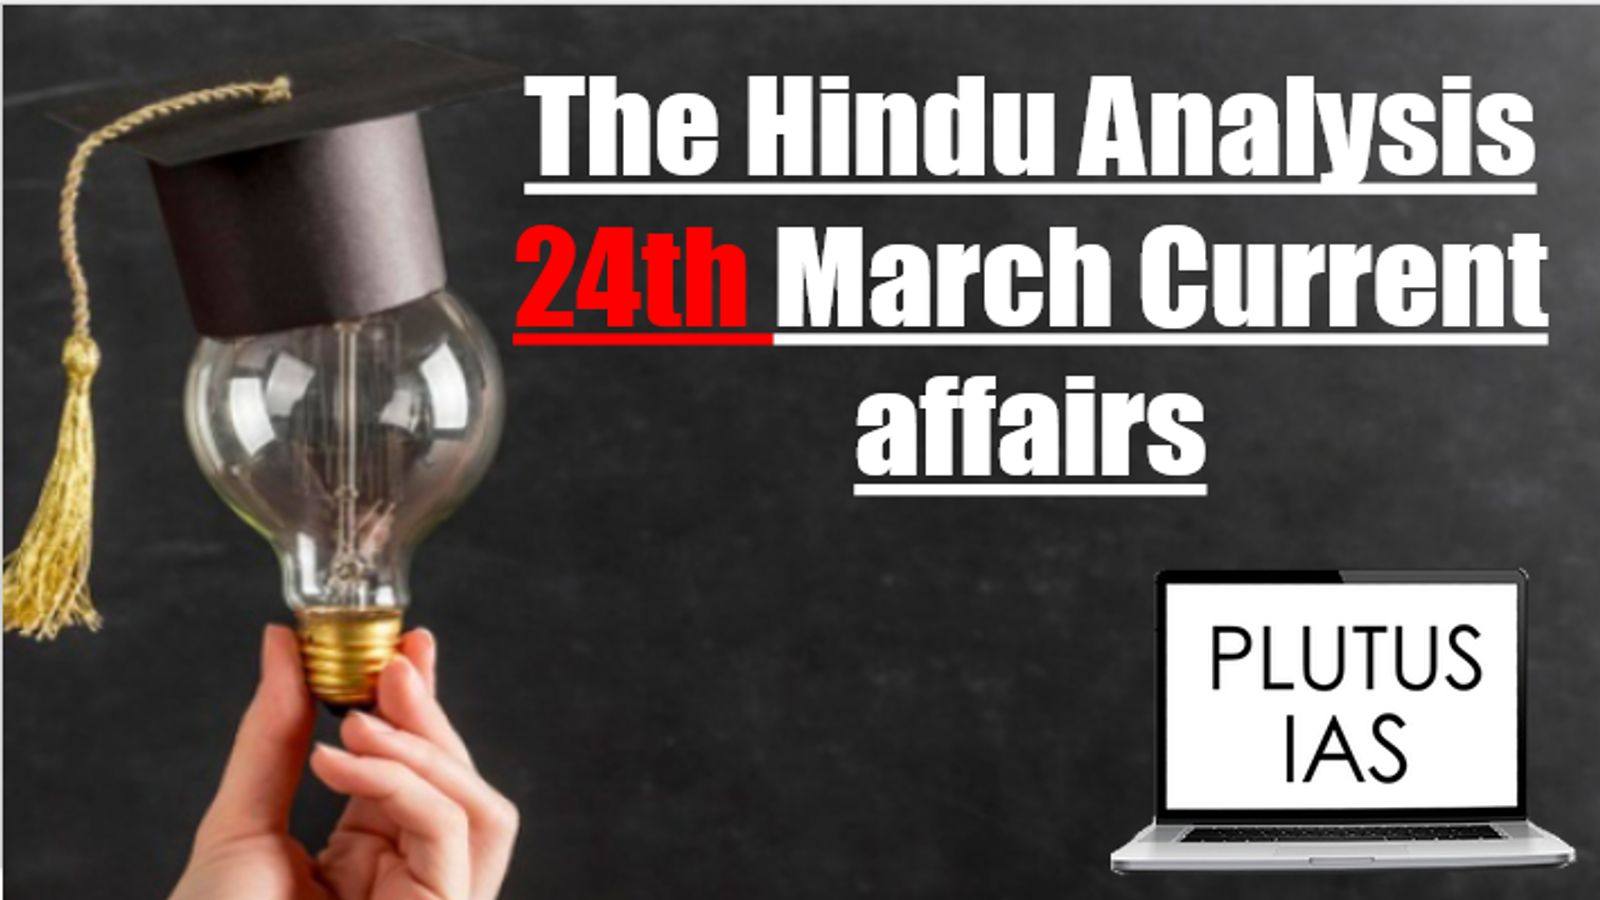 The Hindu Analysis 24th March Current Affairs